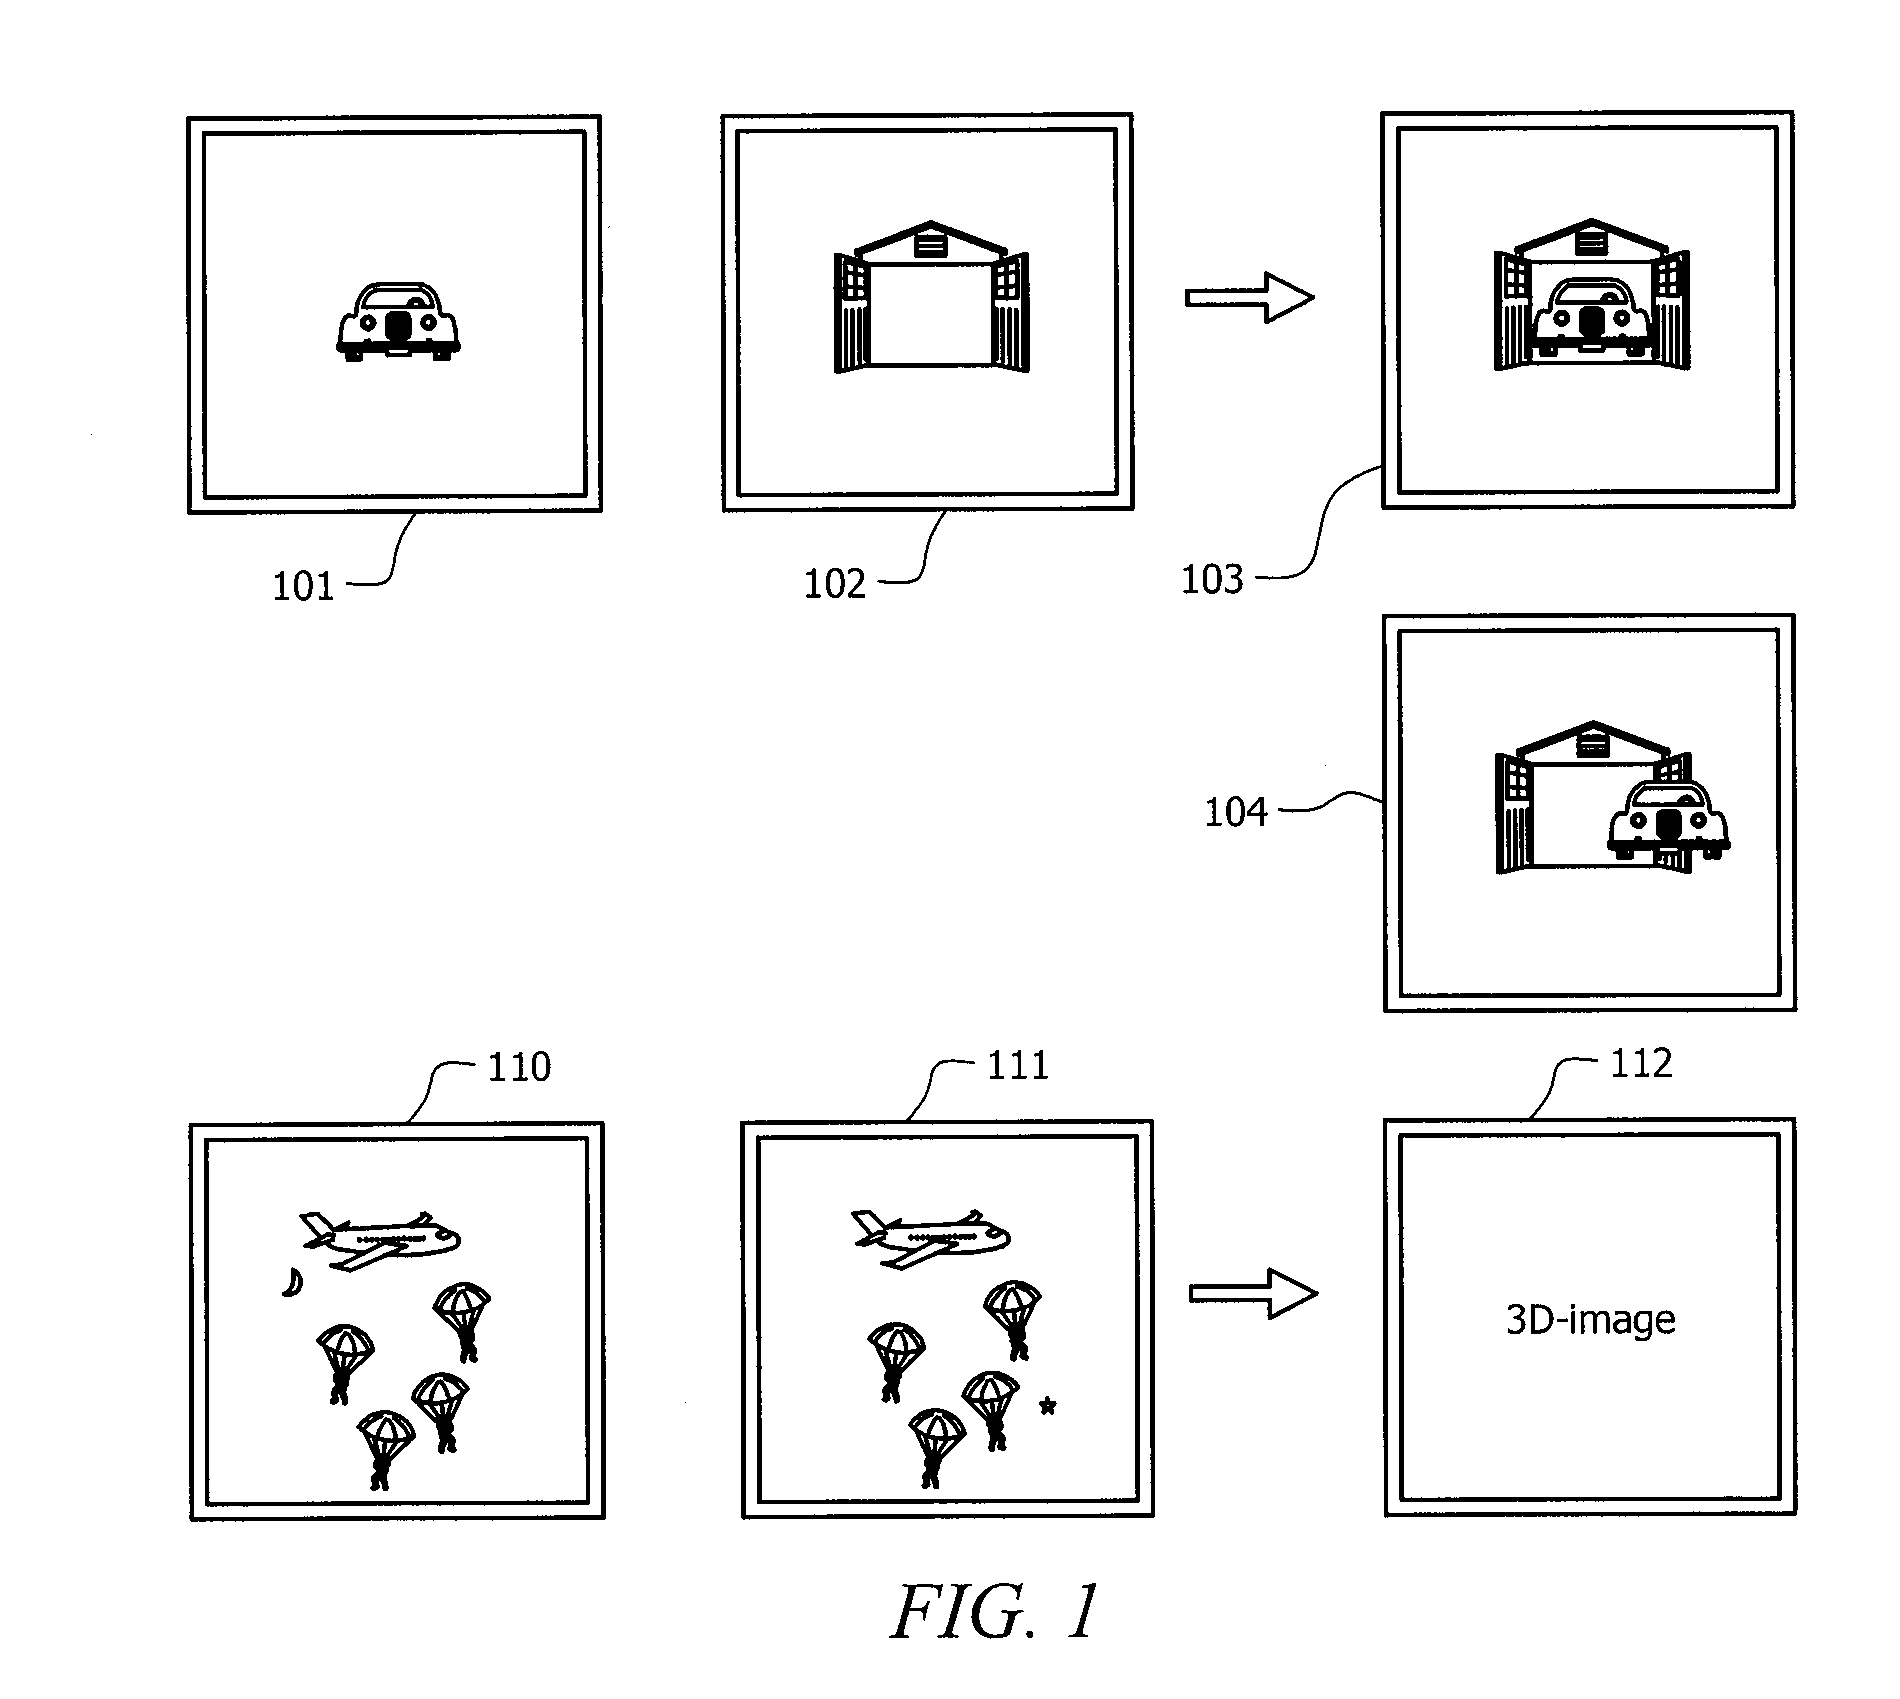 Systems and Methods for Binocular Vision Diagnosis and Treatment